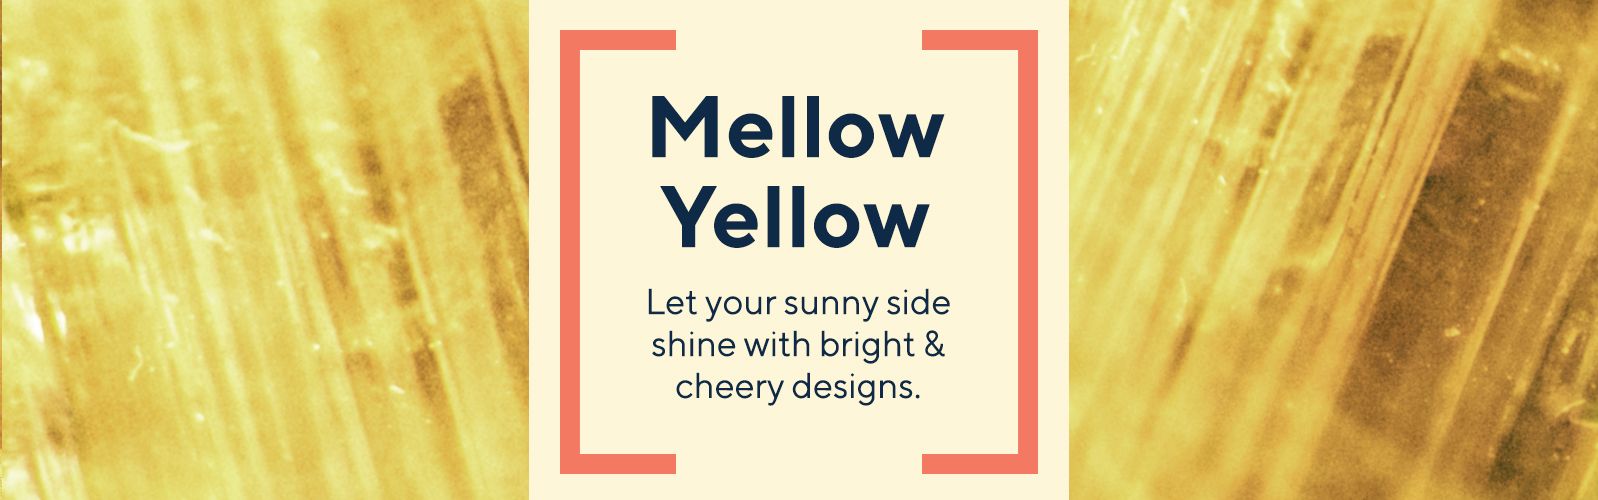 Mellow Yellow - Let your sunny side shine with bright & cheery designs. 